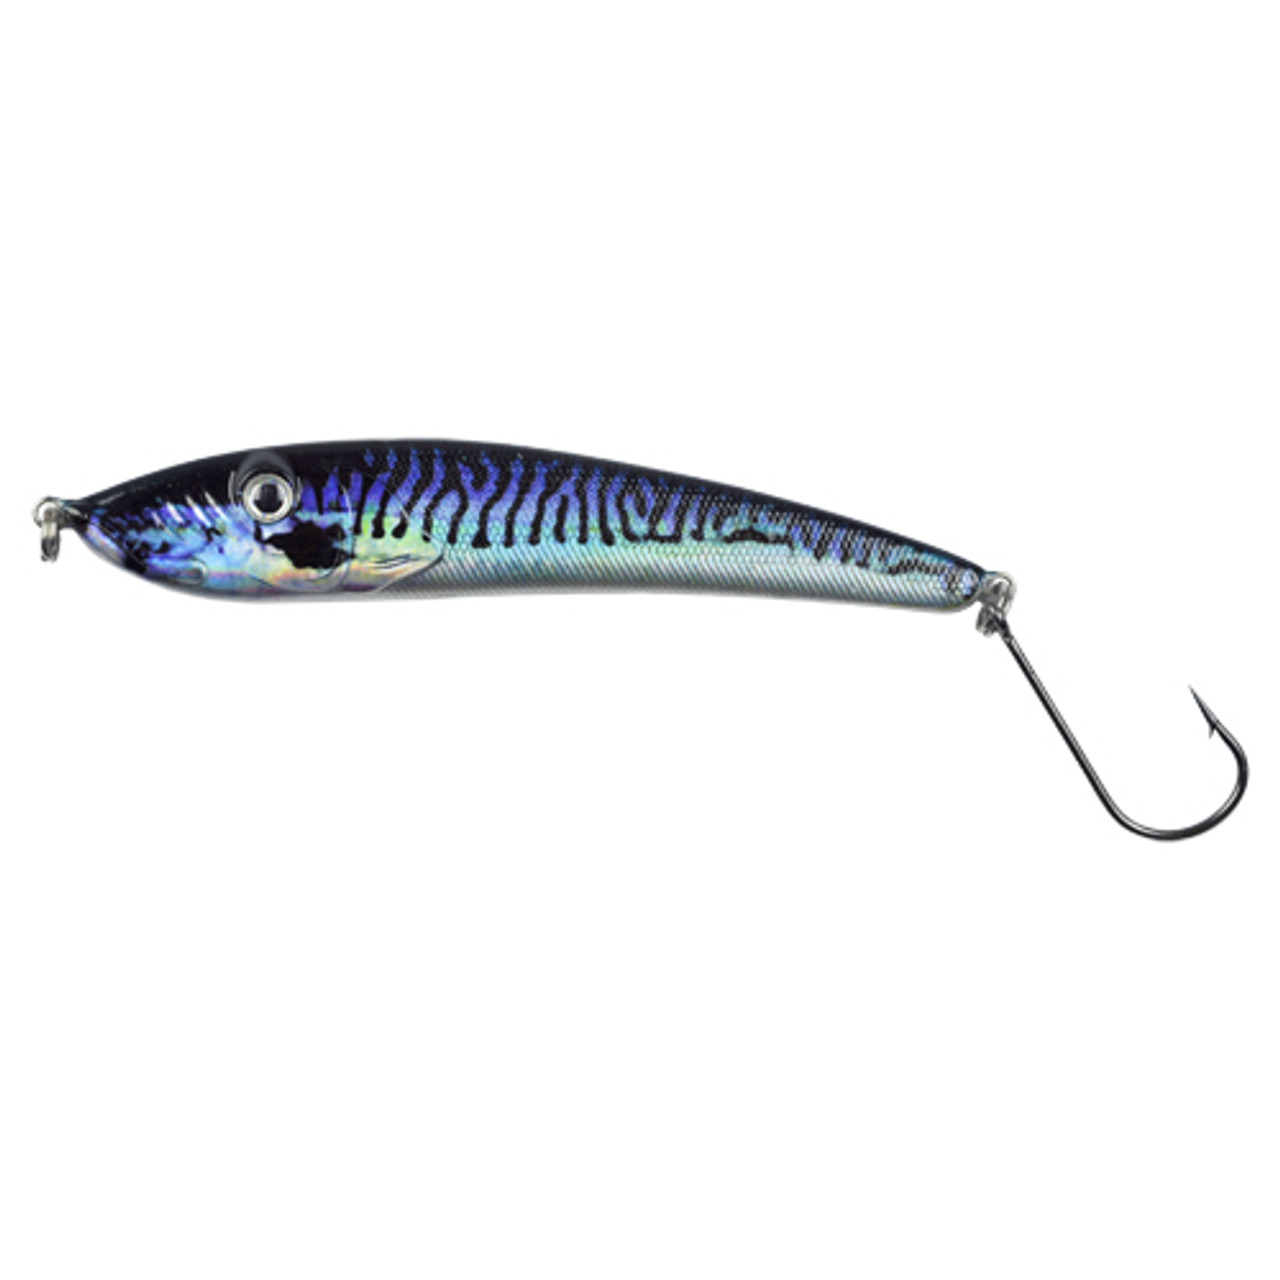 Casting Jig Lures 30g 40g 60g Jigging Lure Slow Jig Metal Jig Tuna Lures  Cheap Fishing Tackle Saltwater - (Color: A 60g), Jigs -  Canada